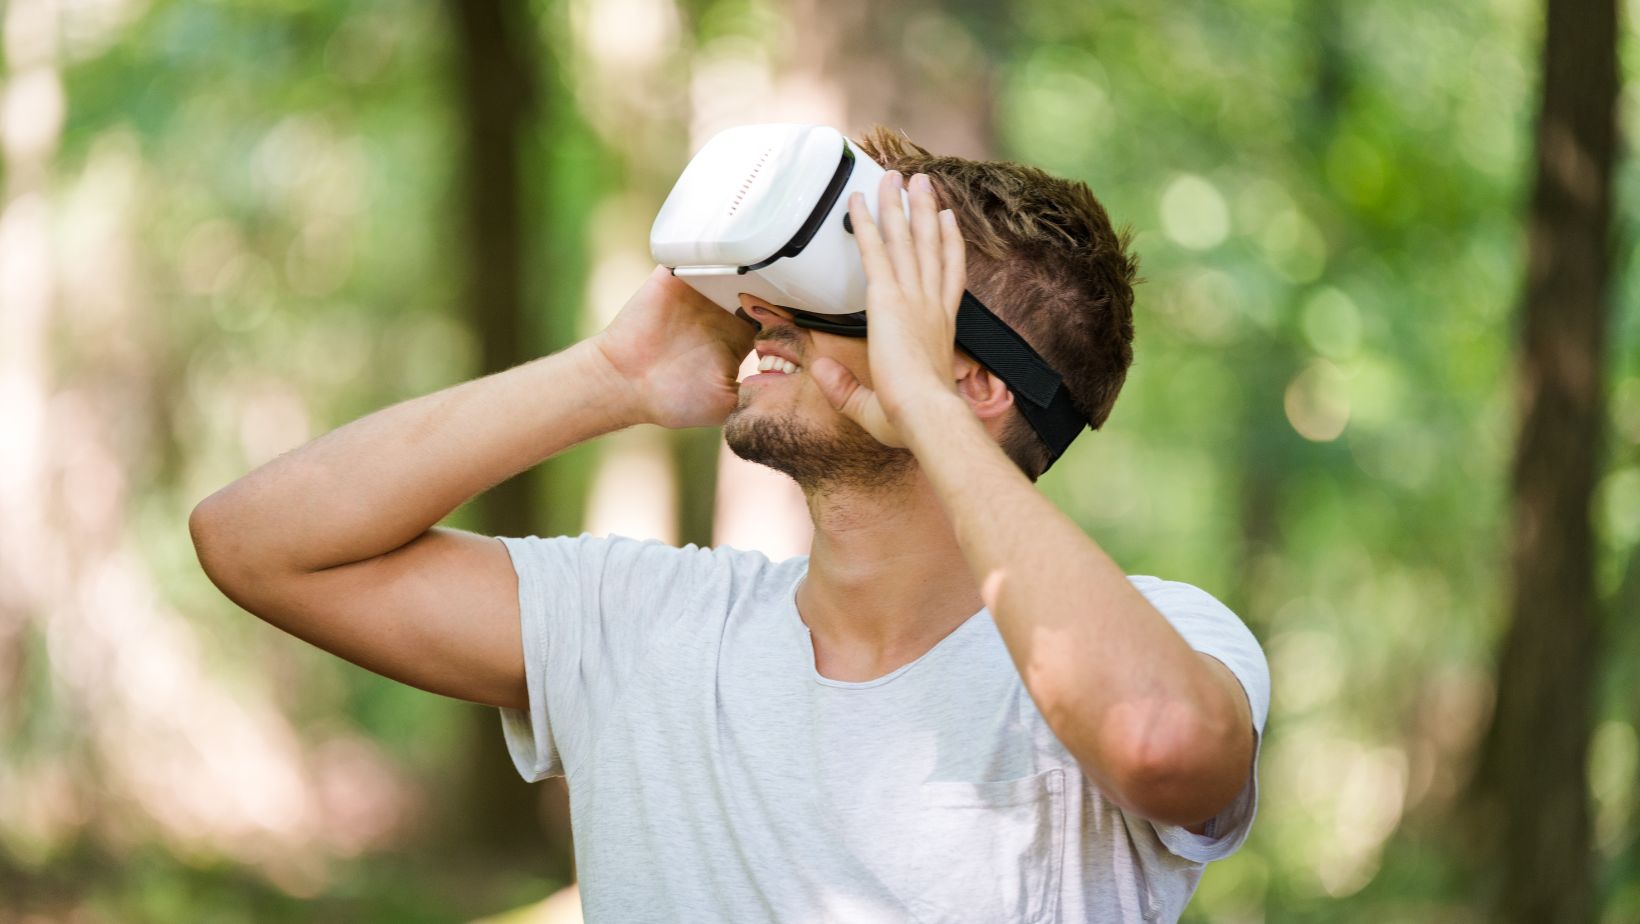 the internet includes virtual reality, augmented reality, and 3d environments.